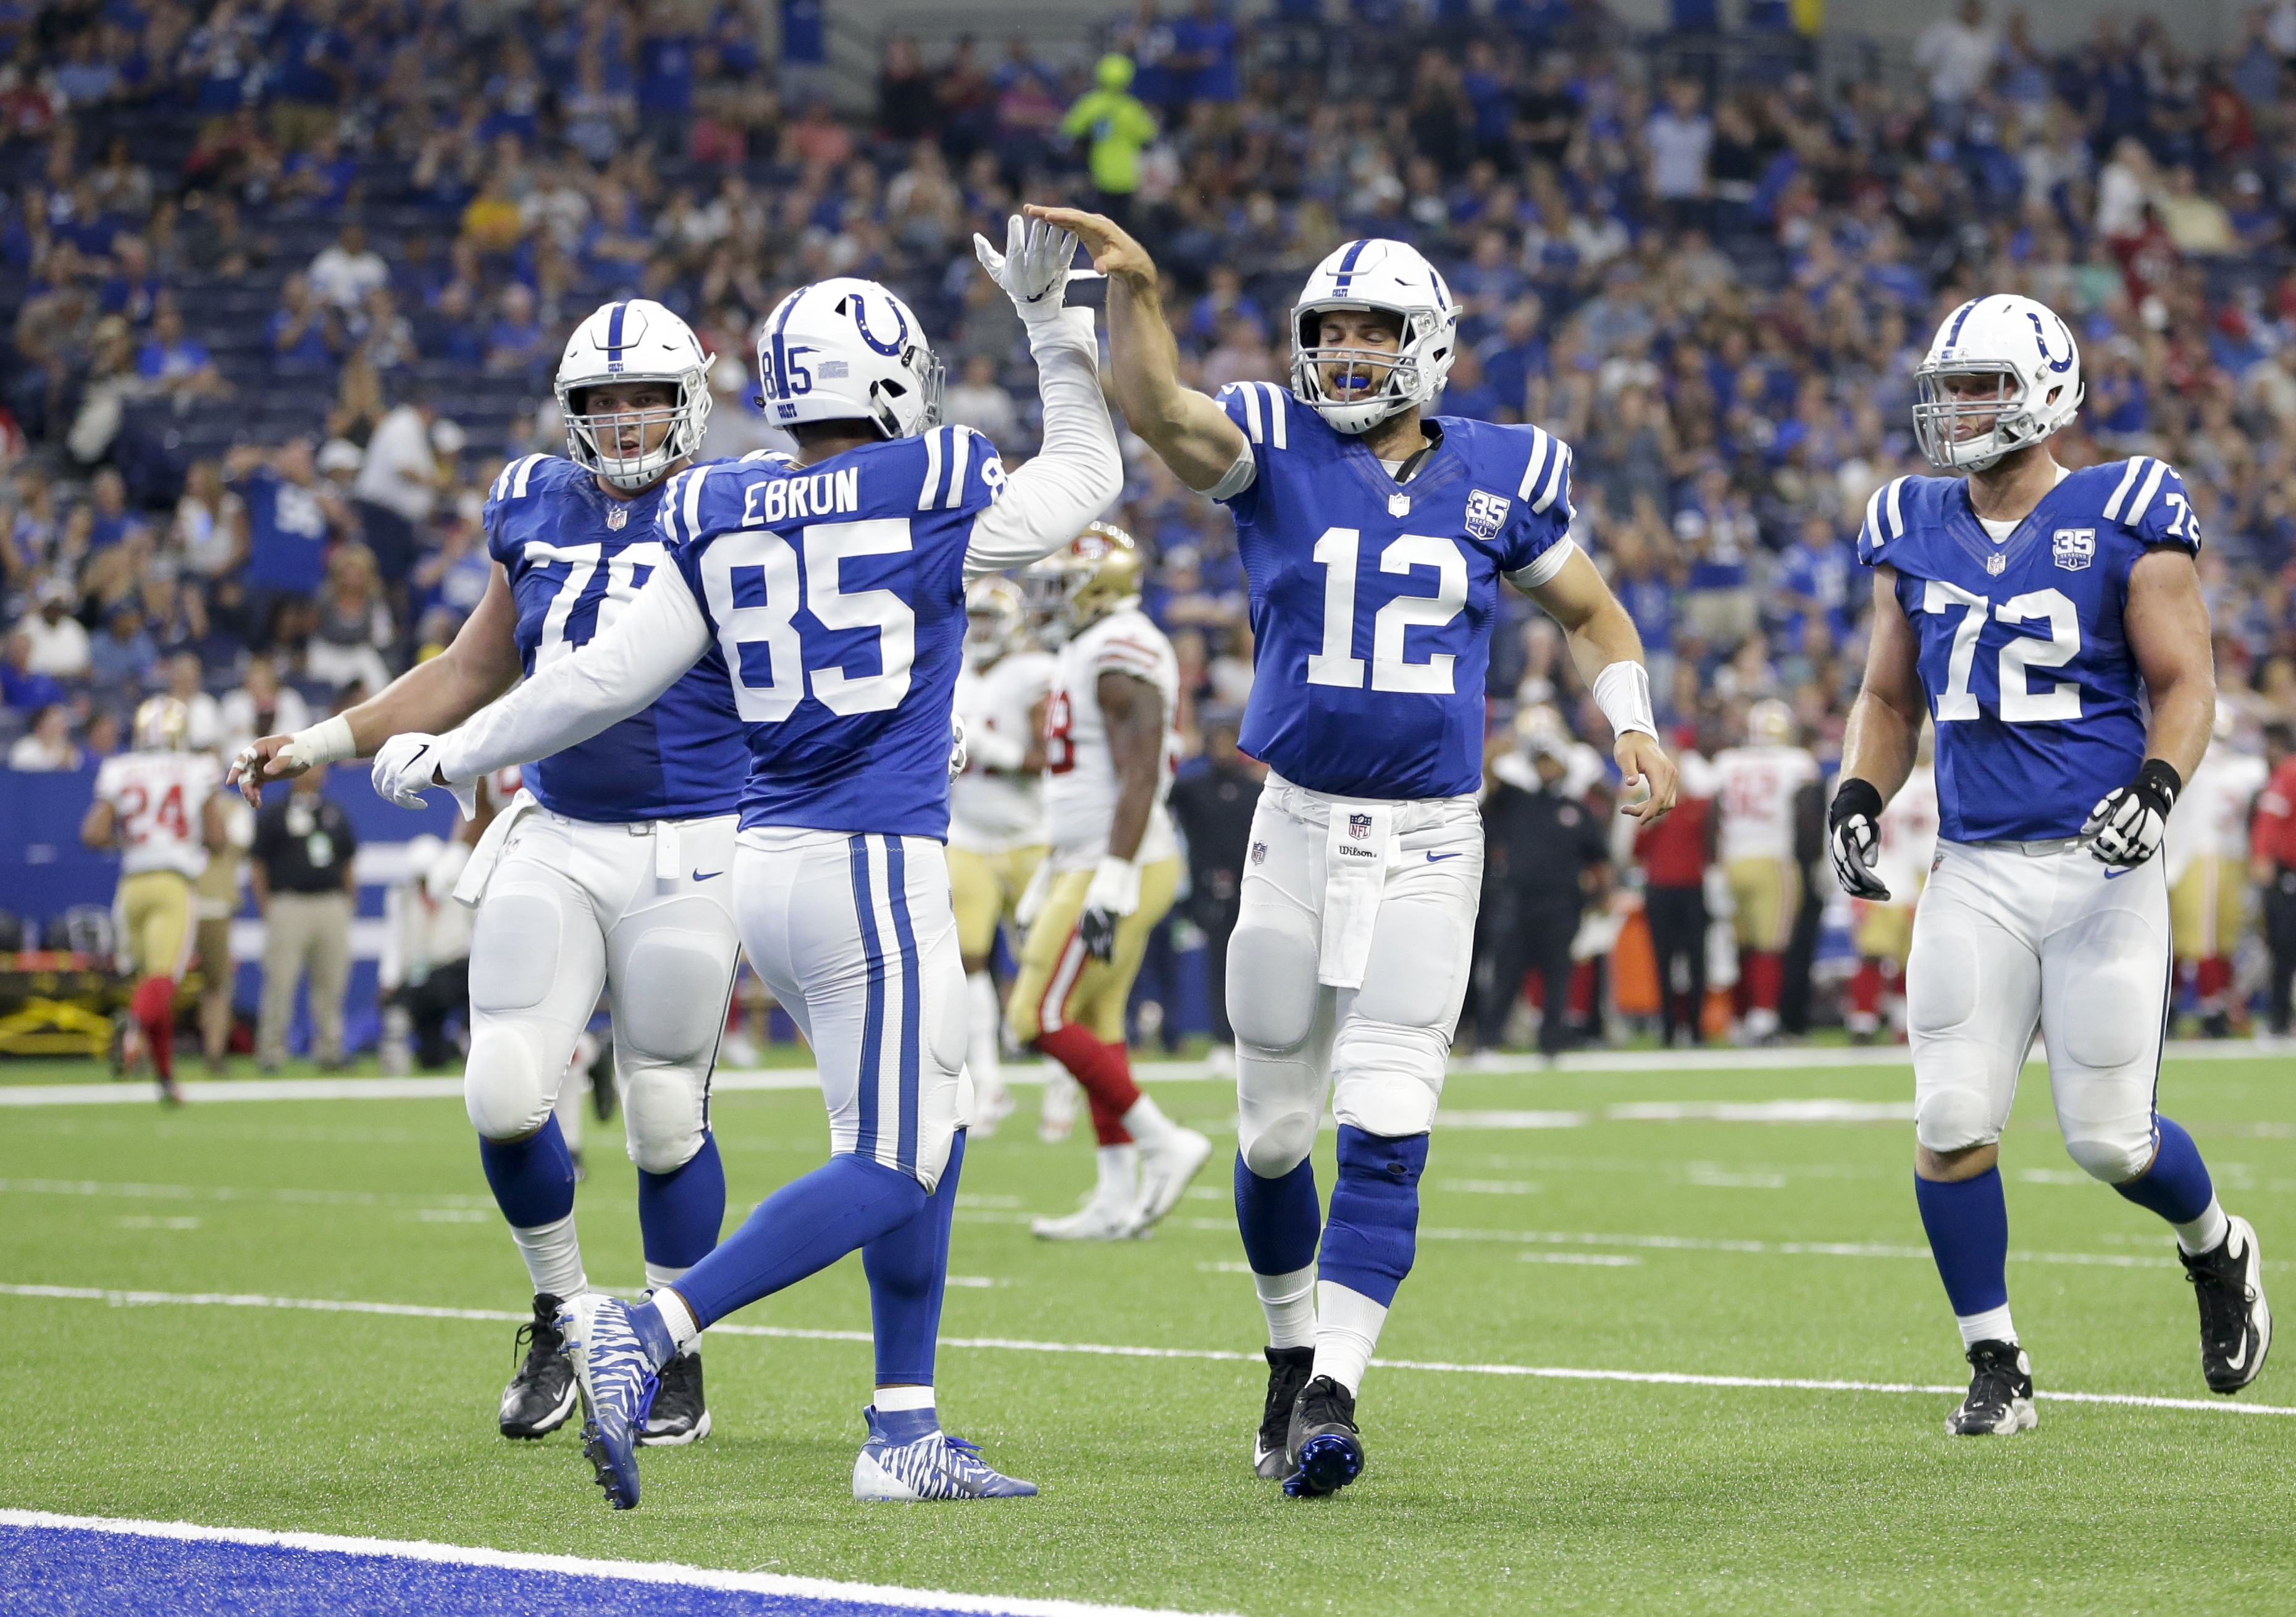 Luck’s sharper touch helps lead Colts past 49ers 23-17